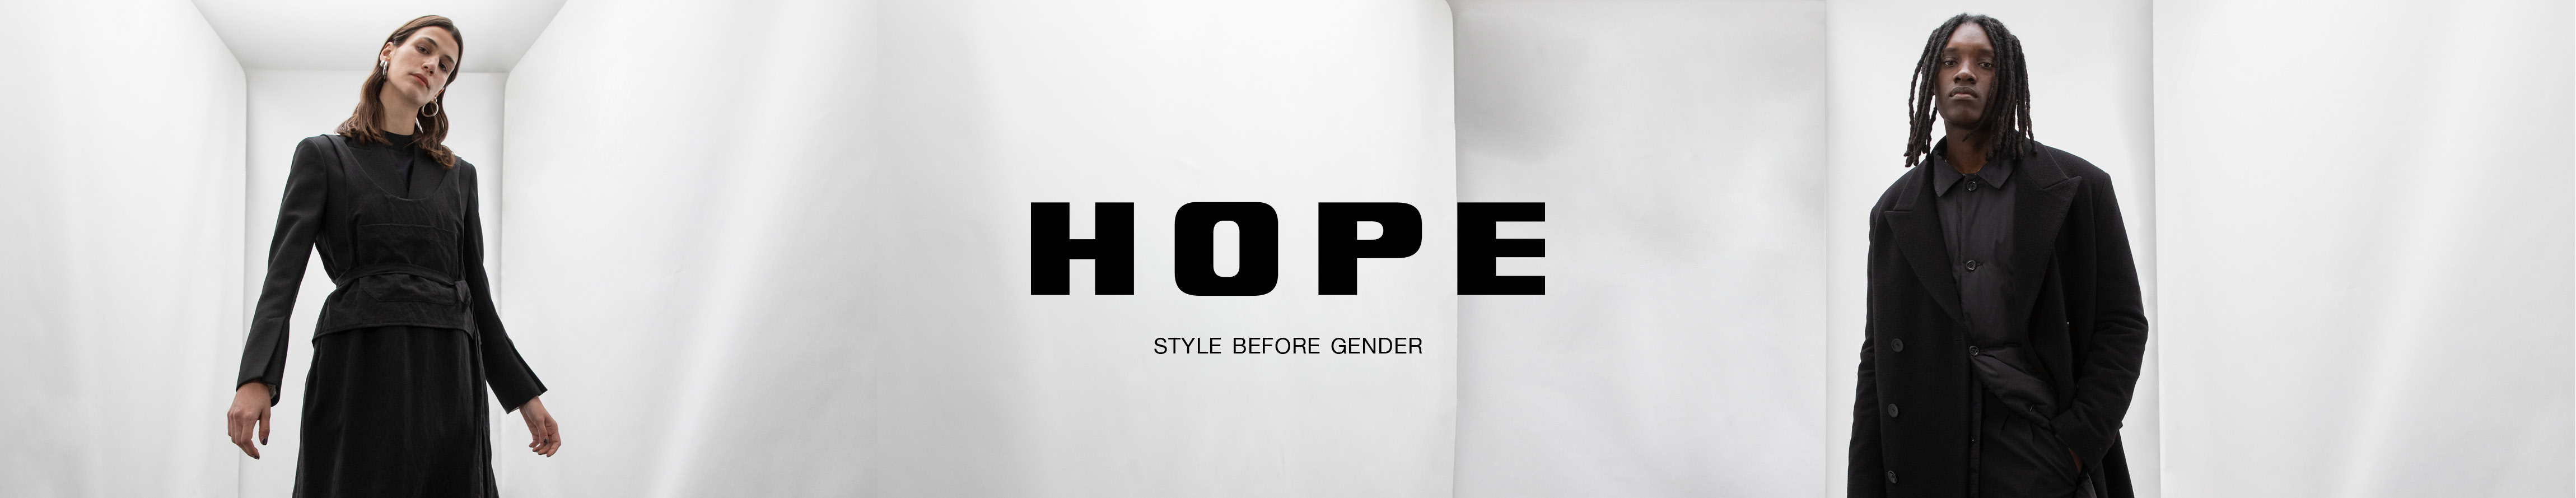 HOPE Brand Page Banner